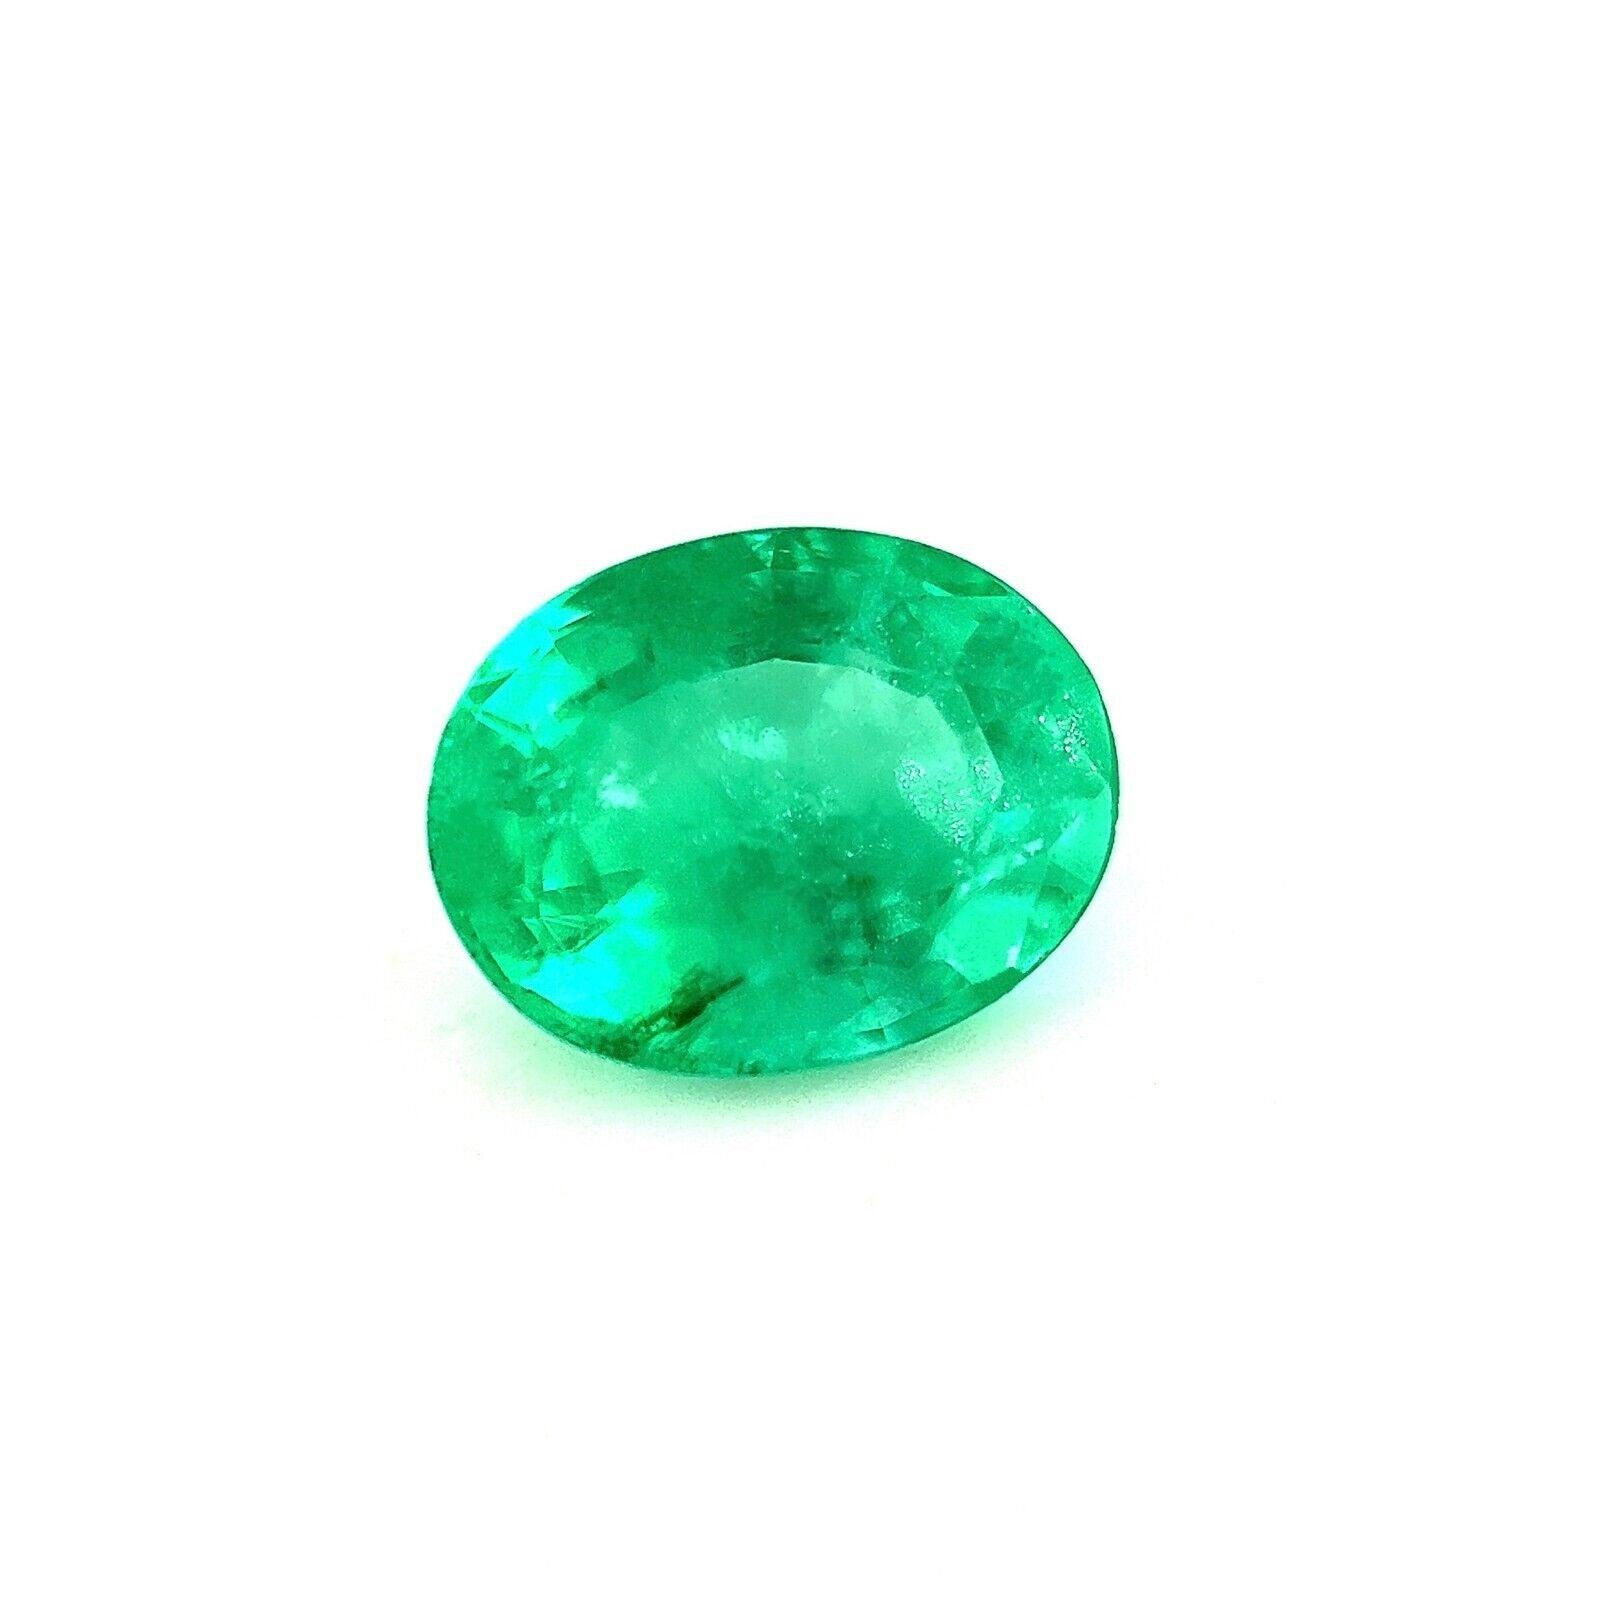 Natural 1.85Ct Emerald Rare Vivid Green Oval Cut Loose Gemstone

Natural Green Emerald Loose Gemstone.

1.85 Carat emerald with a beautiful green colour. Also has good clarity, with only some natural inclusions visible when looking closely. Emeralds